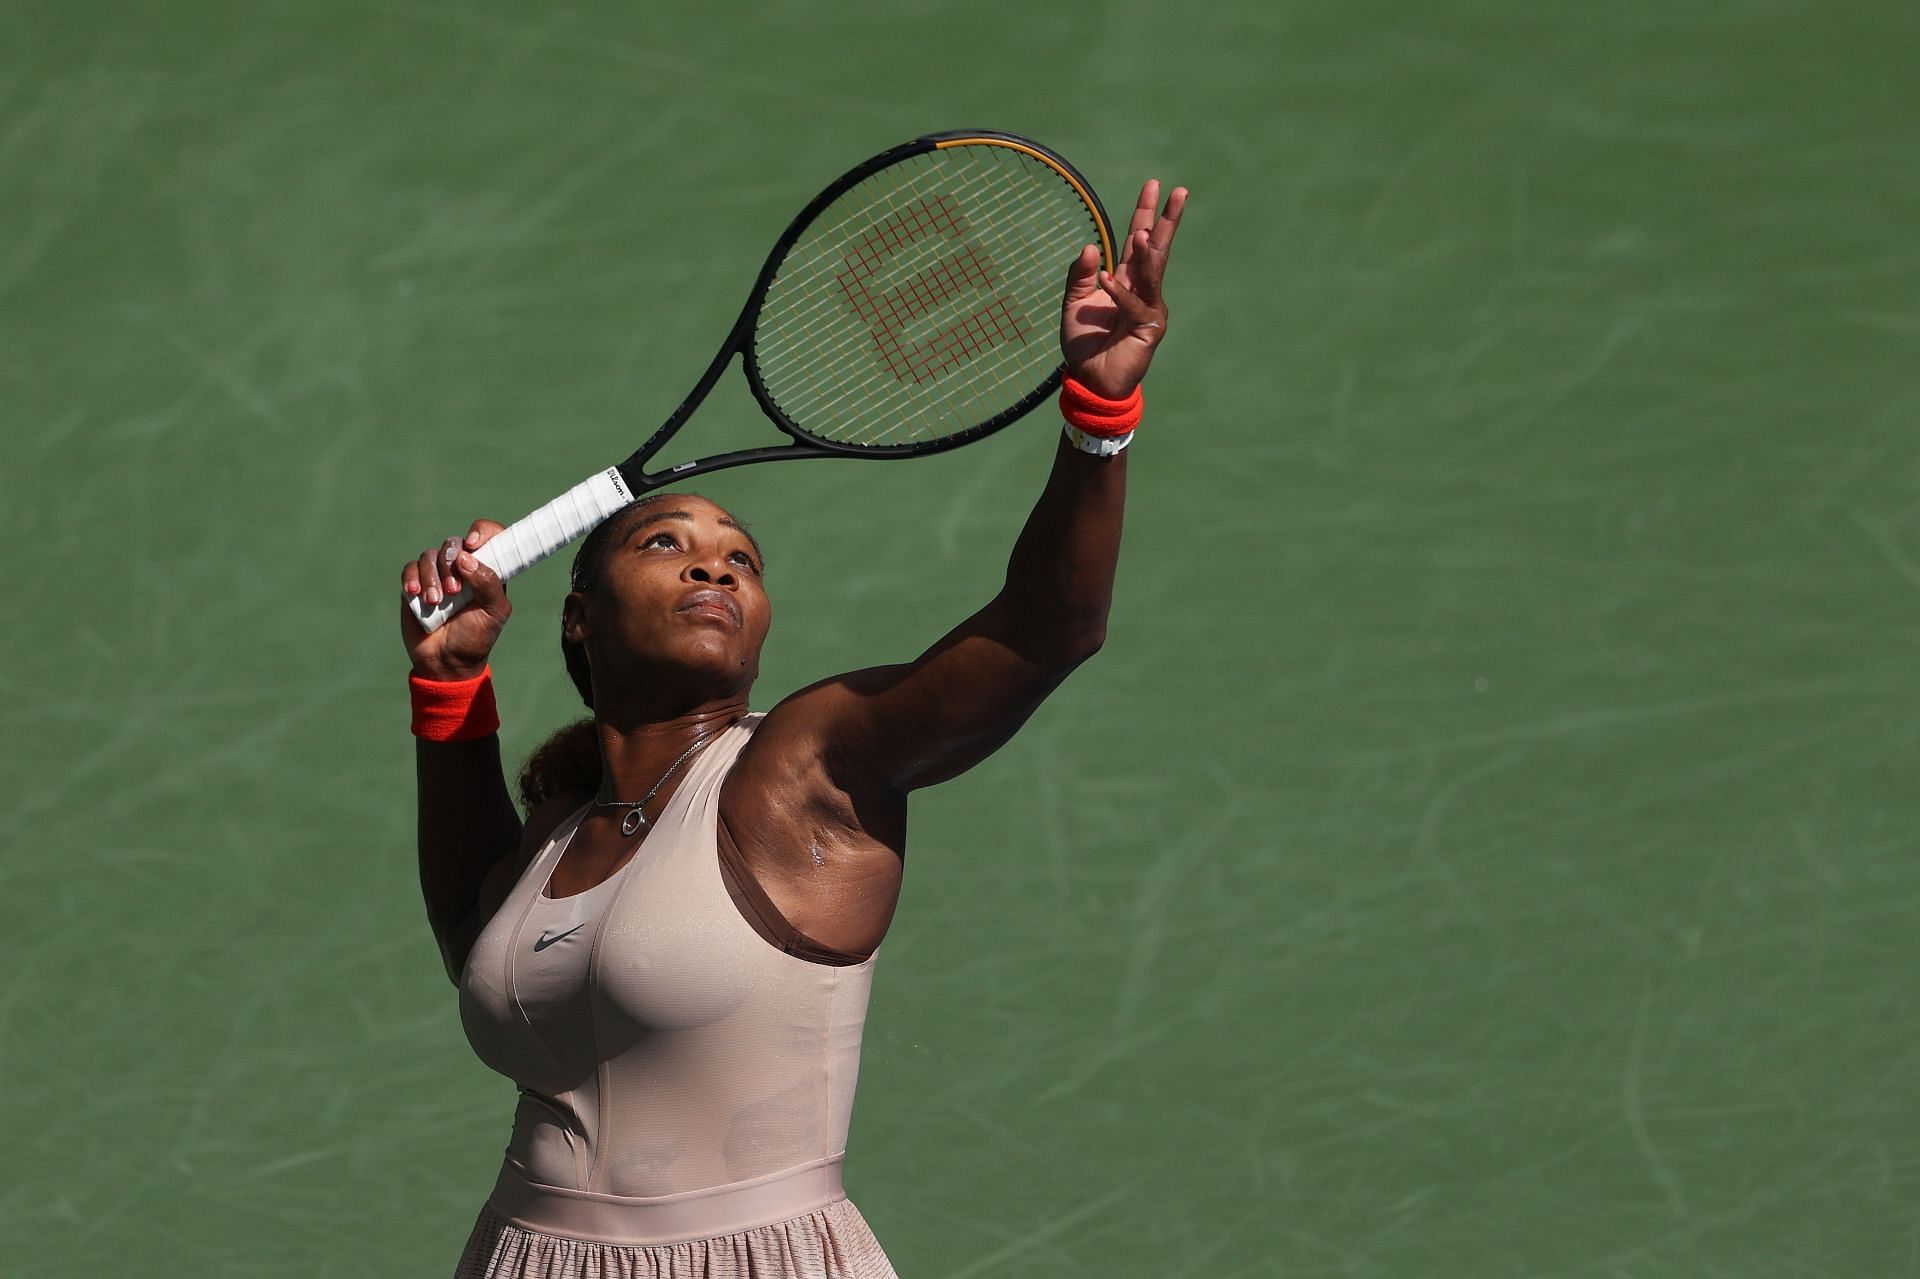 Serena Williams is a six-time US Open champion